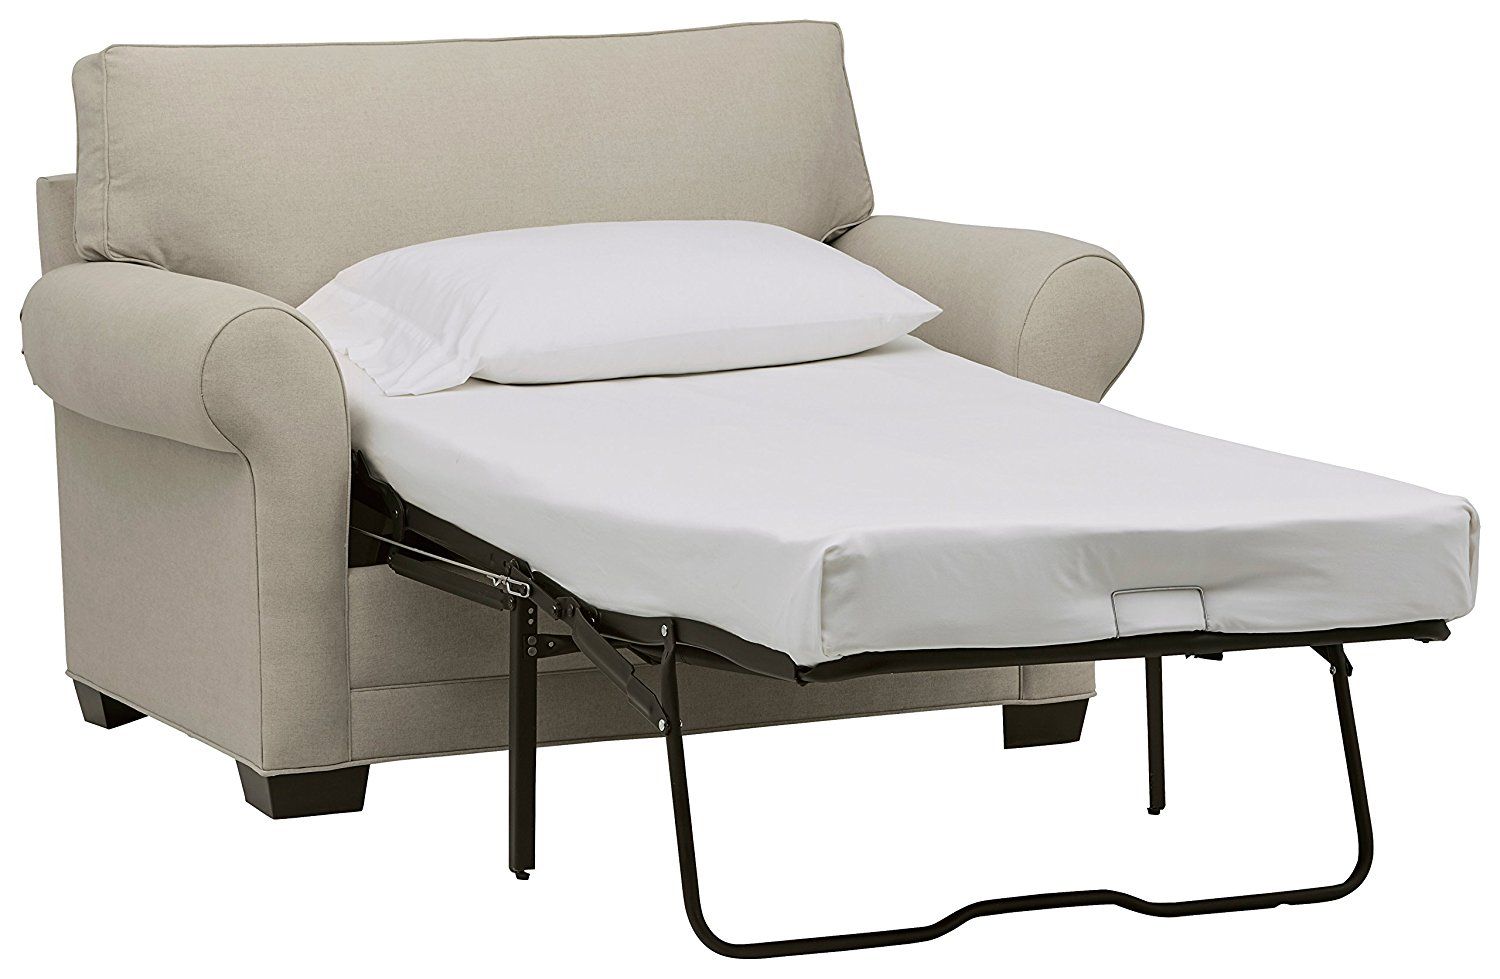 5 Best Chair Beds For Adults – Costculator Inside Convertible Light Gray Chair Beds (Gallery 15 of 20)